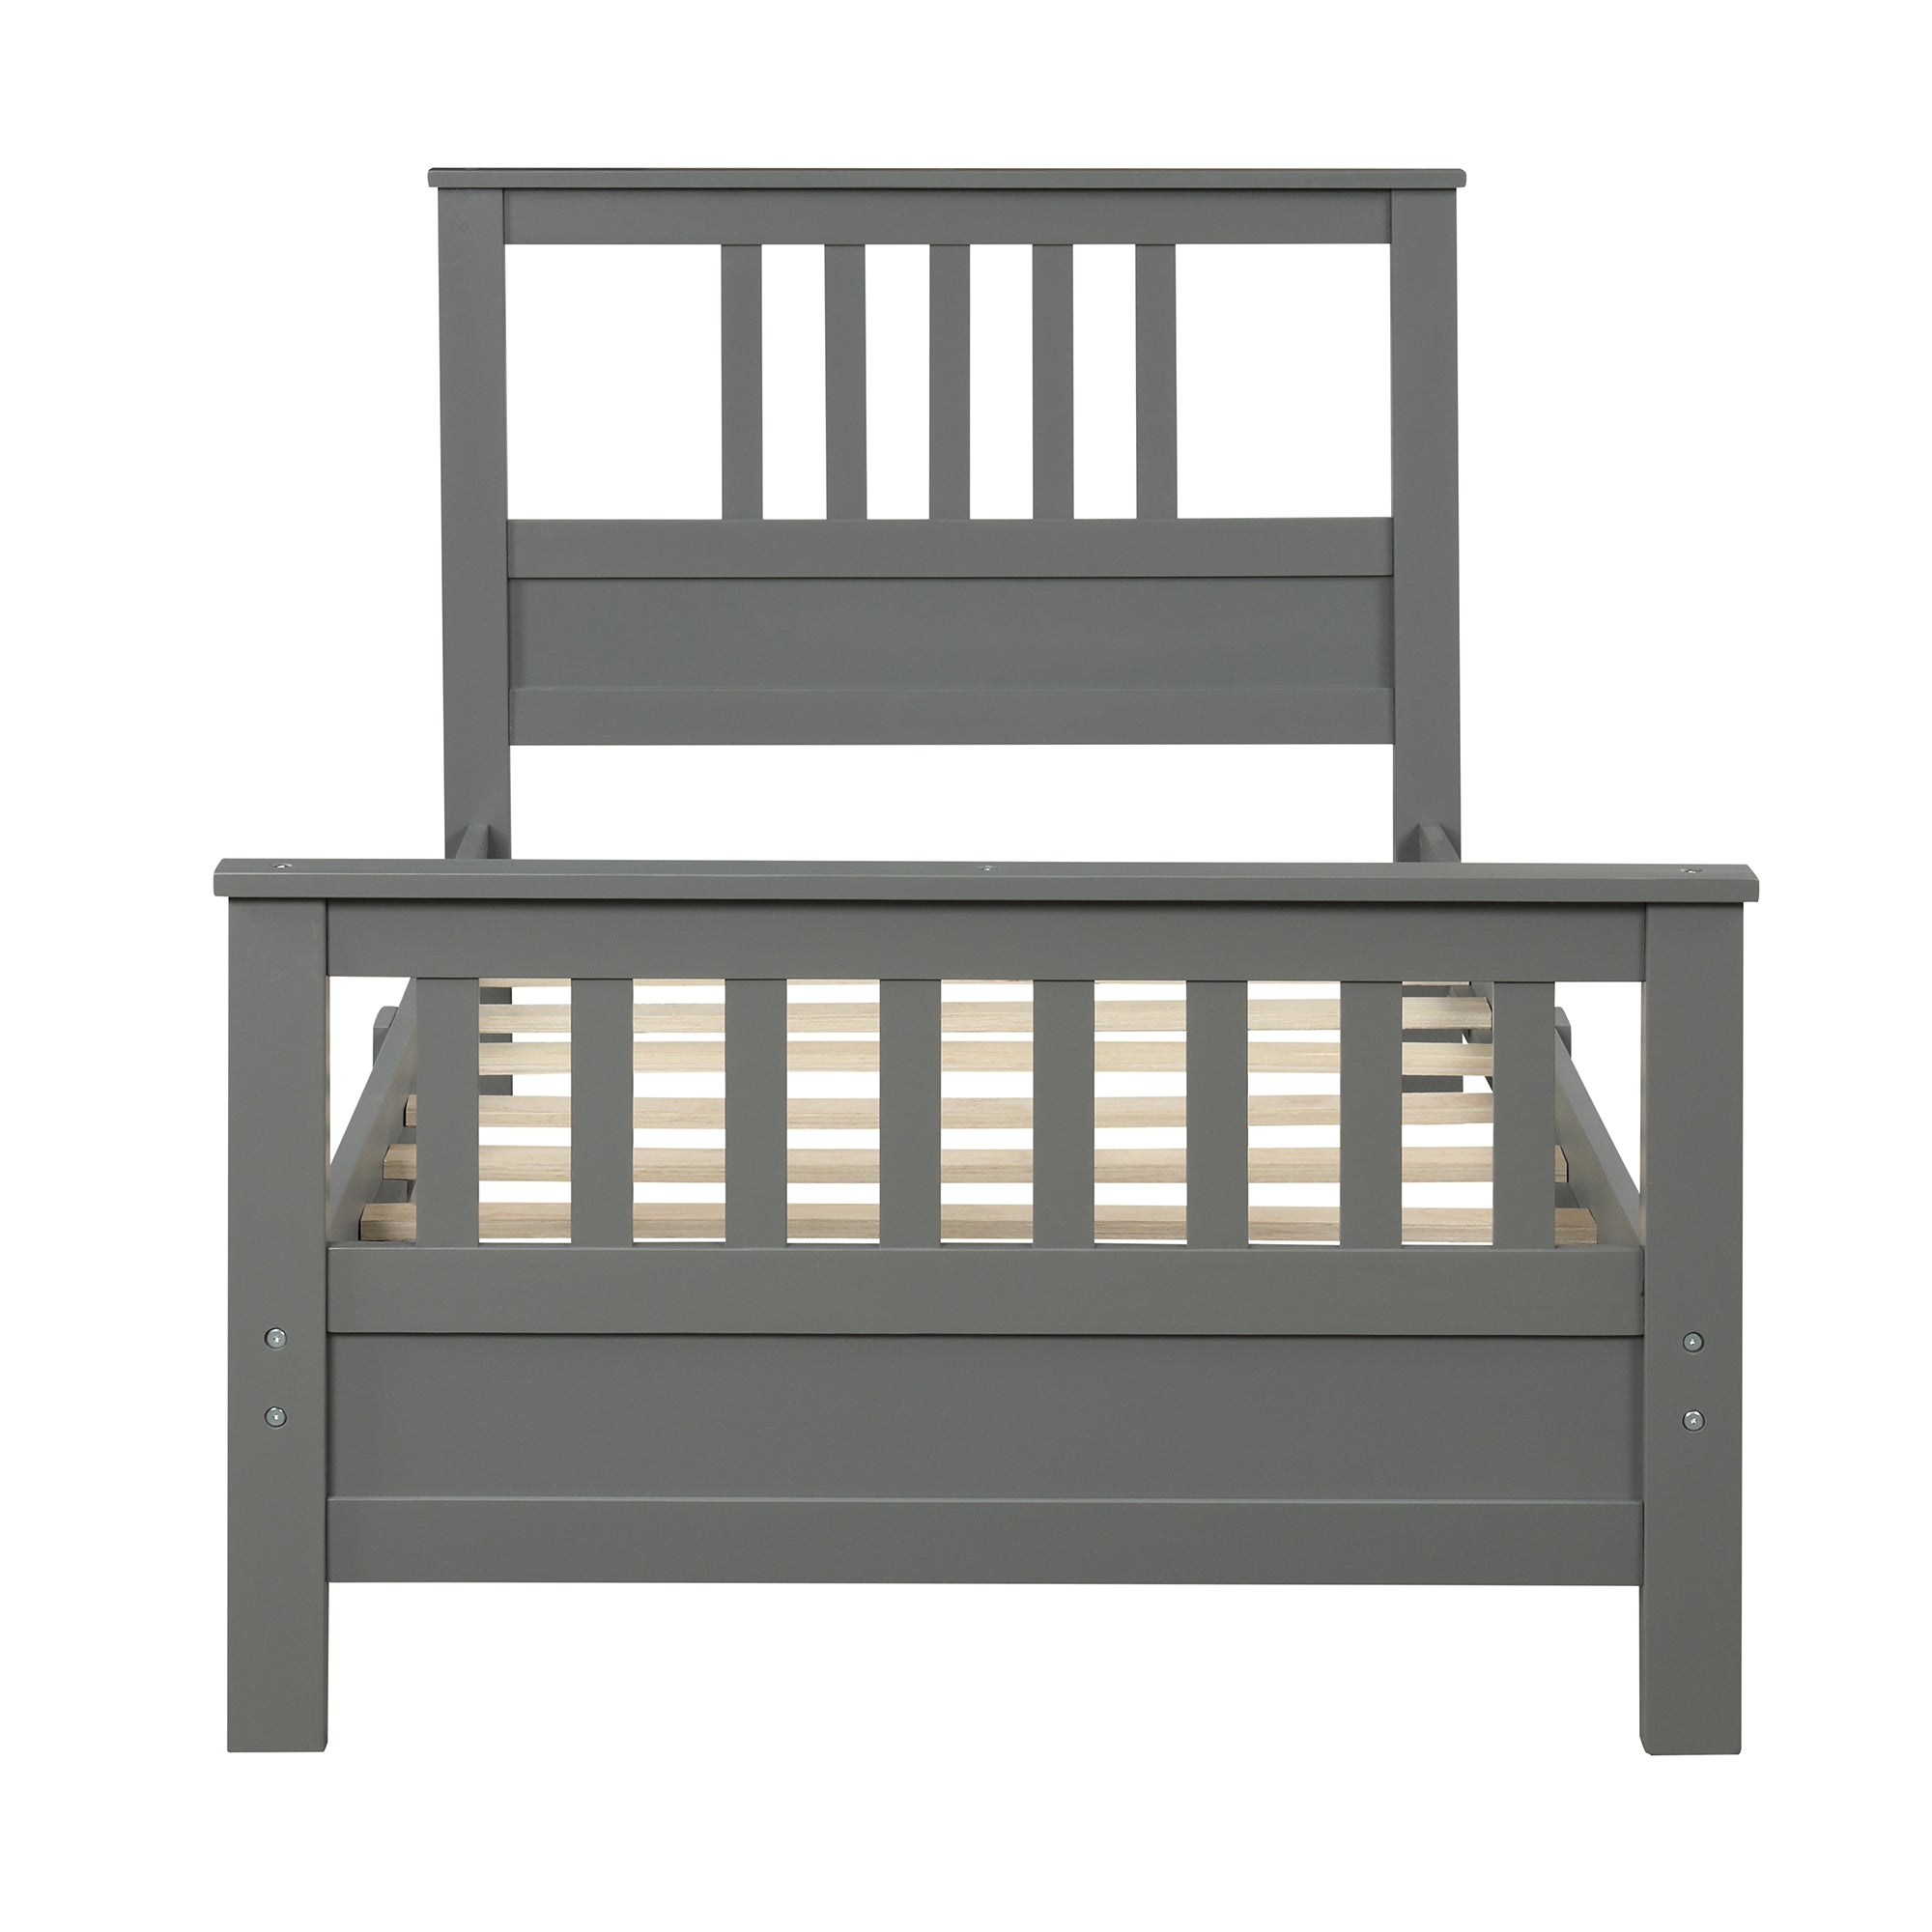 Gray Wood Platform Bed with Headboard and Footboard By: Alabama Beds